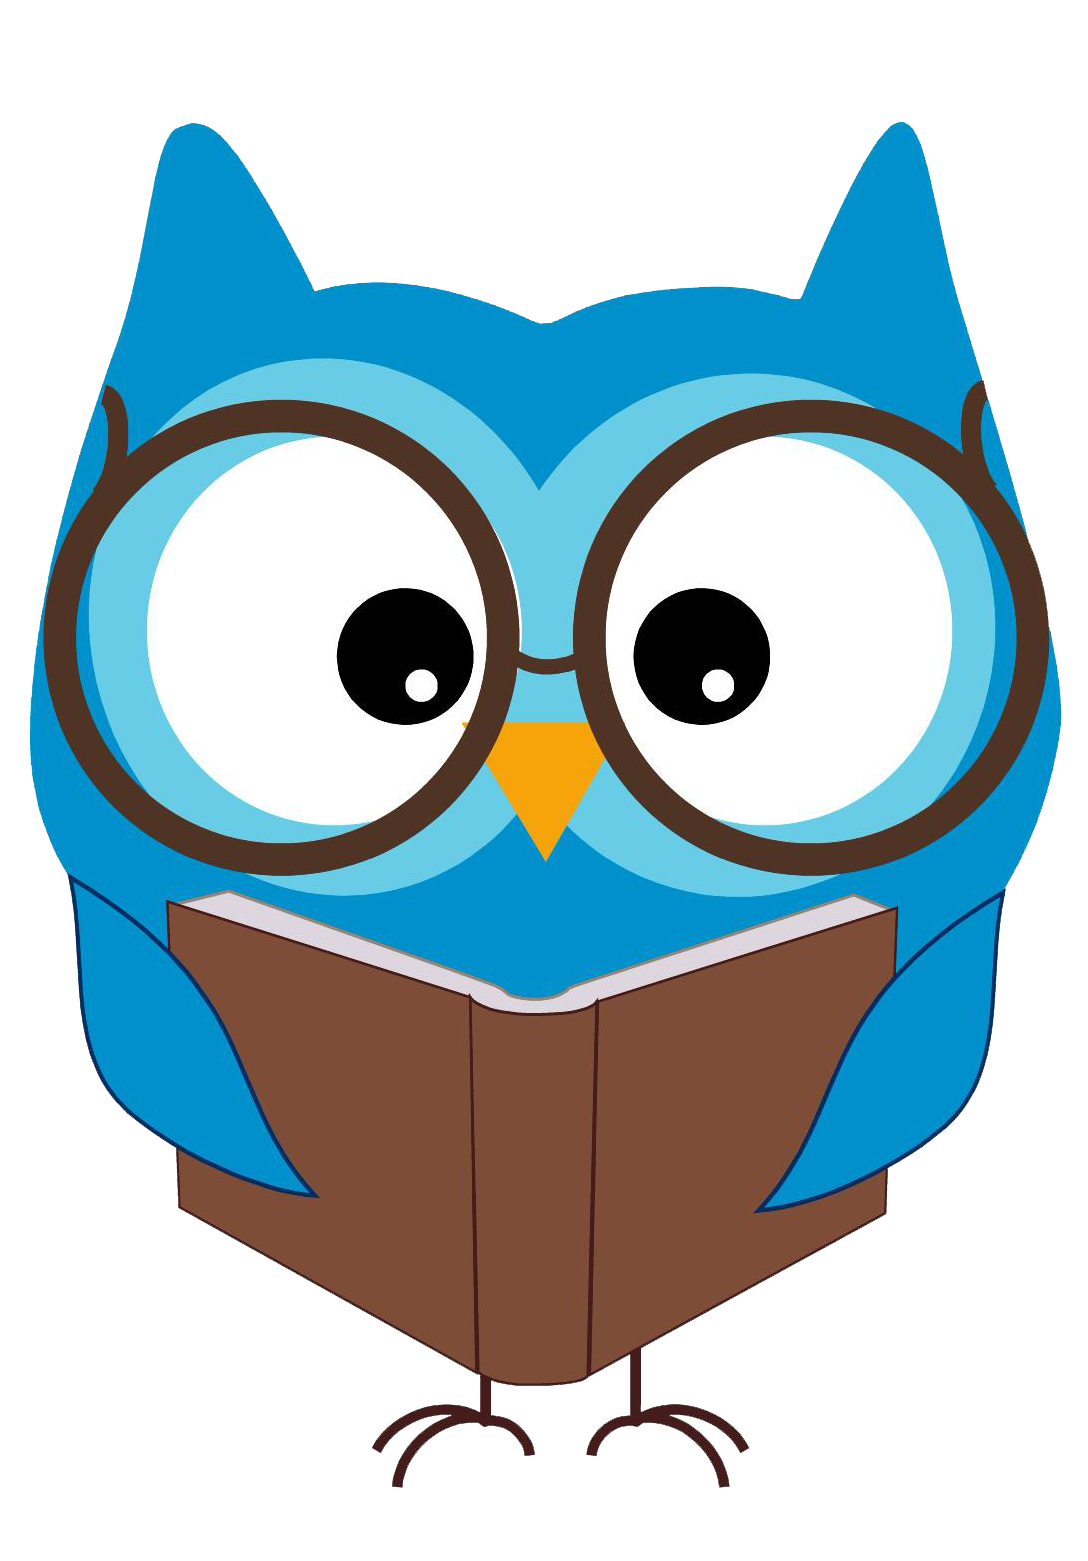 Free Reading Clip Art Of Reading Owl Clip Art Image For Your Personal Projects, Presentations Or Web Designs. - Animals Reading, Transparent background PNG HD thumbnail